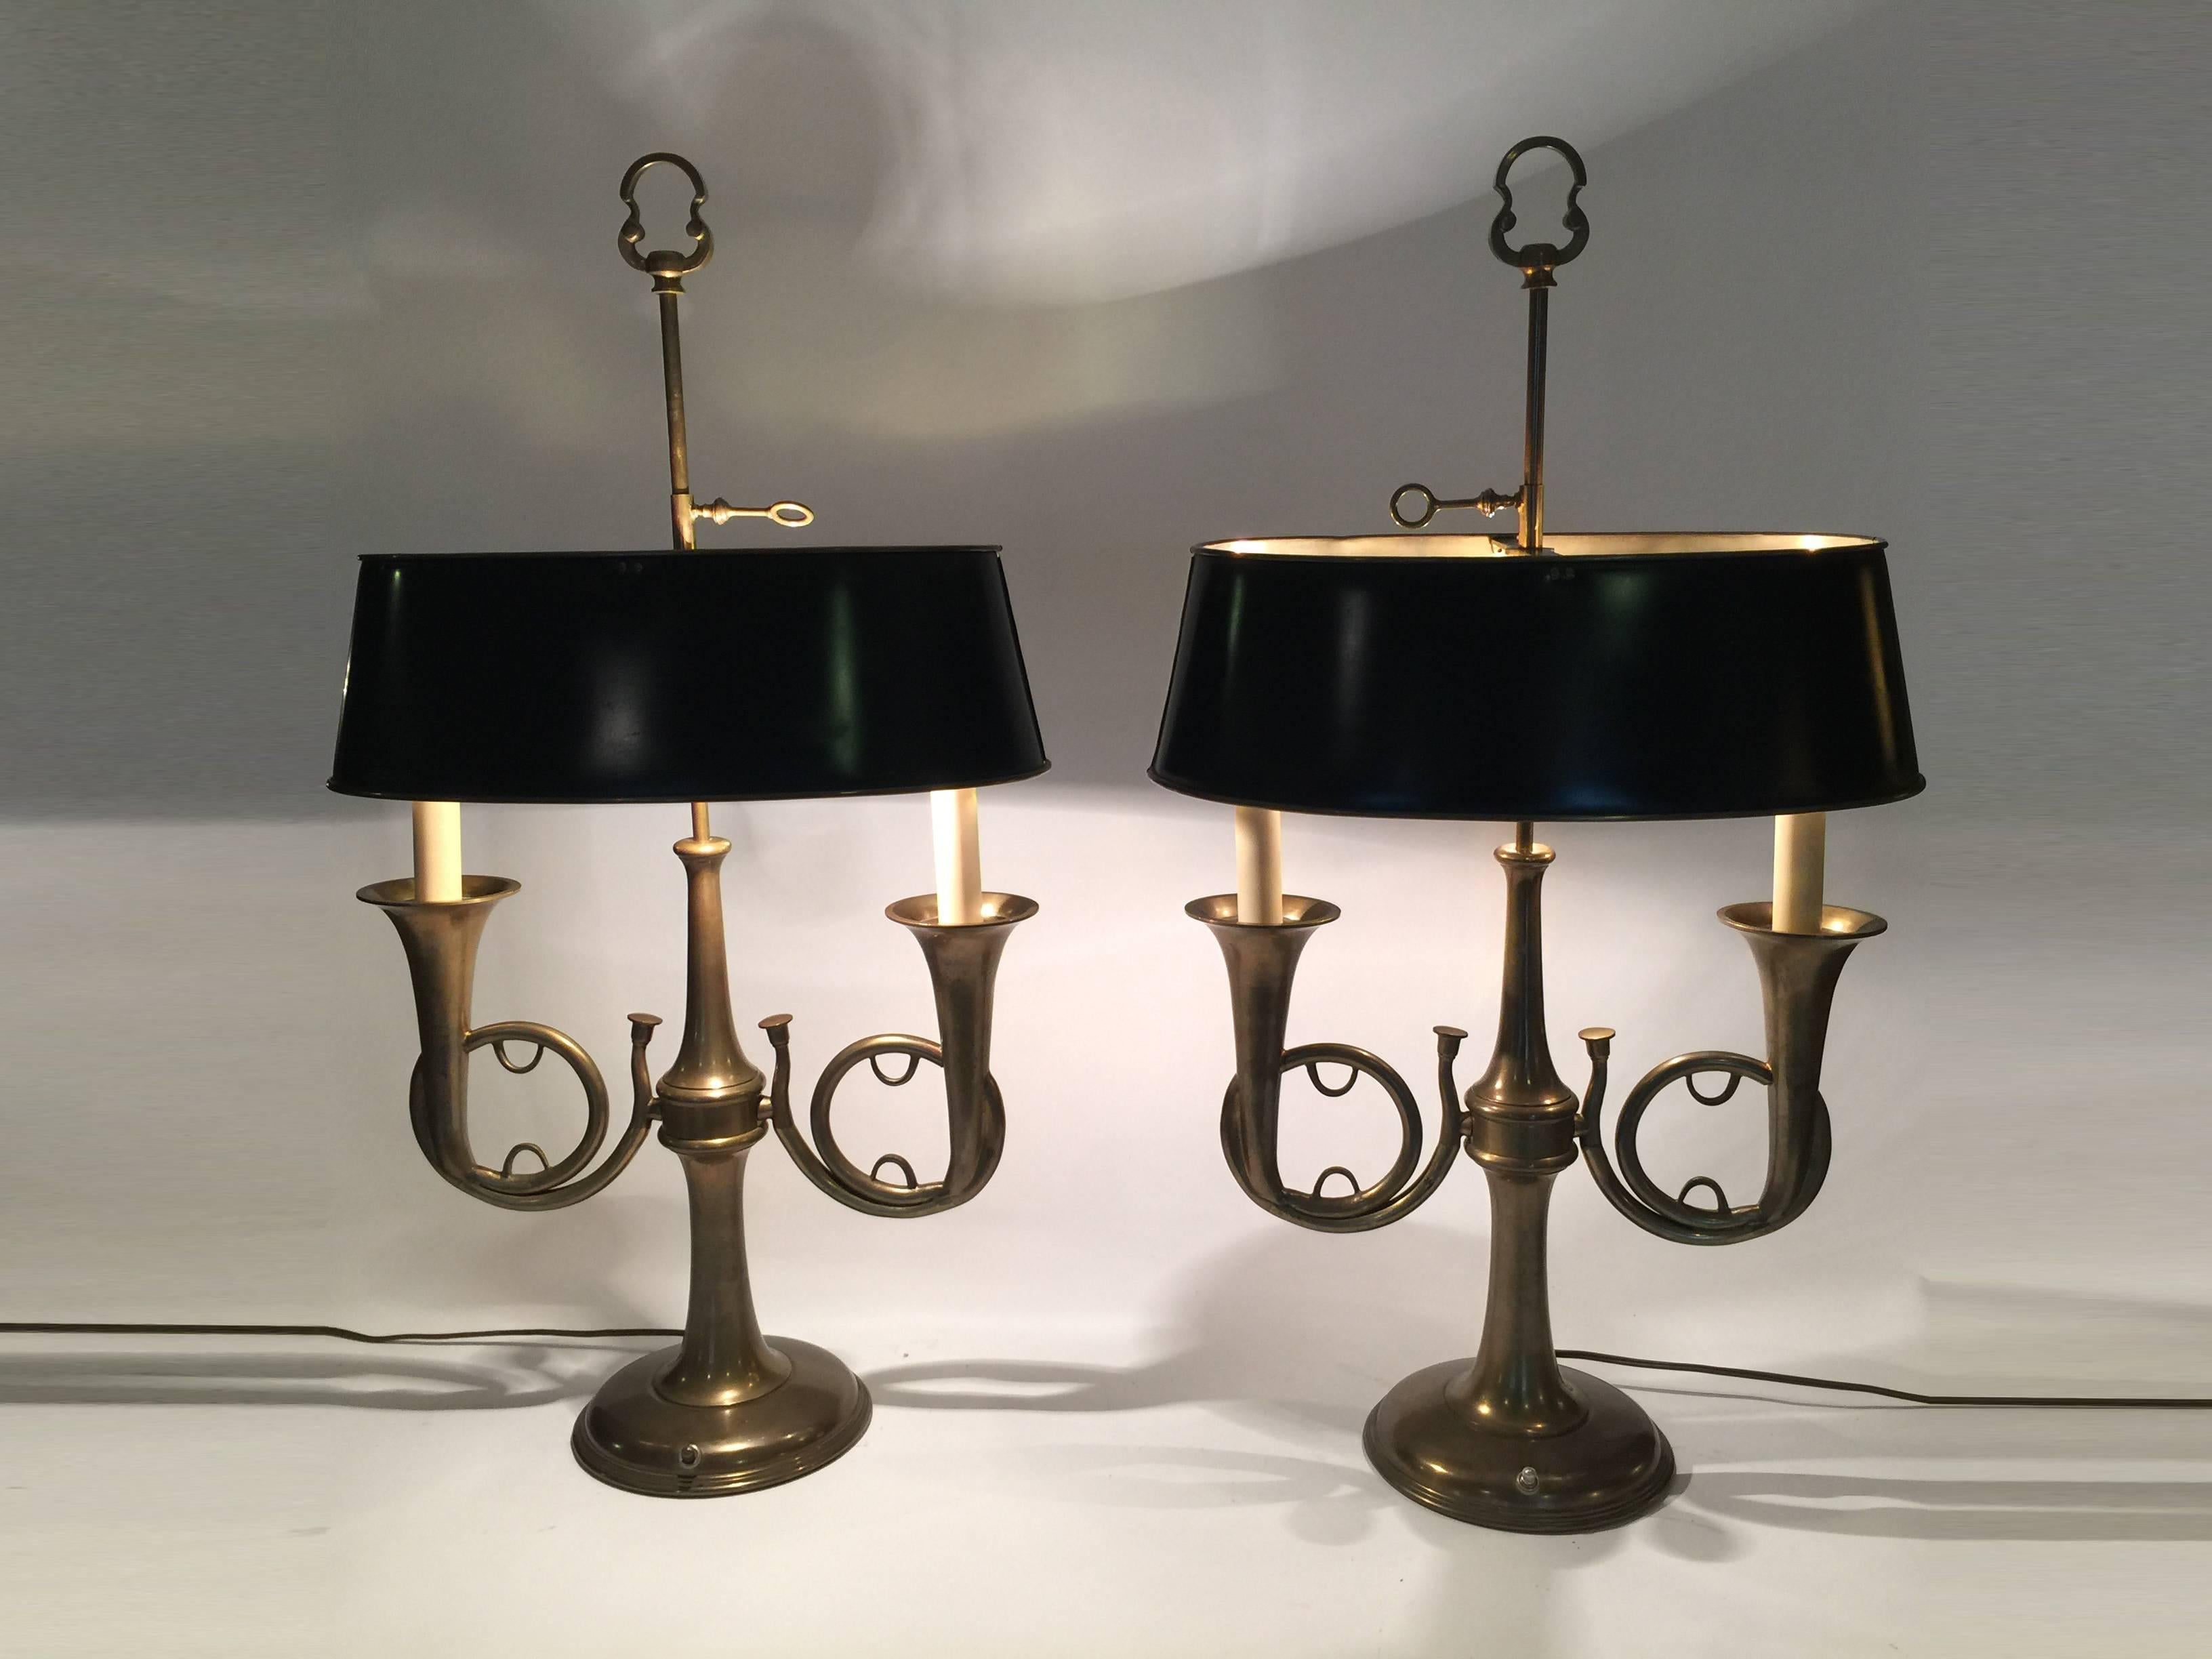 Pair of vintage Chapman French Horn table lamps with black tole lampshades, circa 1960-1970.